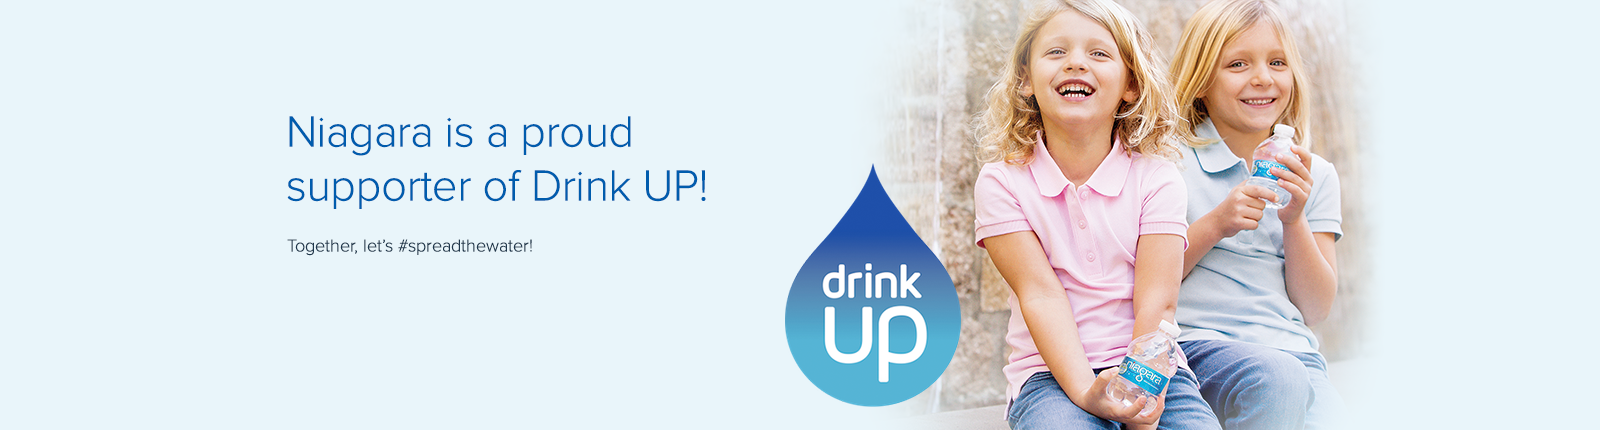 Niagara is a proud supporter of Drink UP!